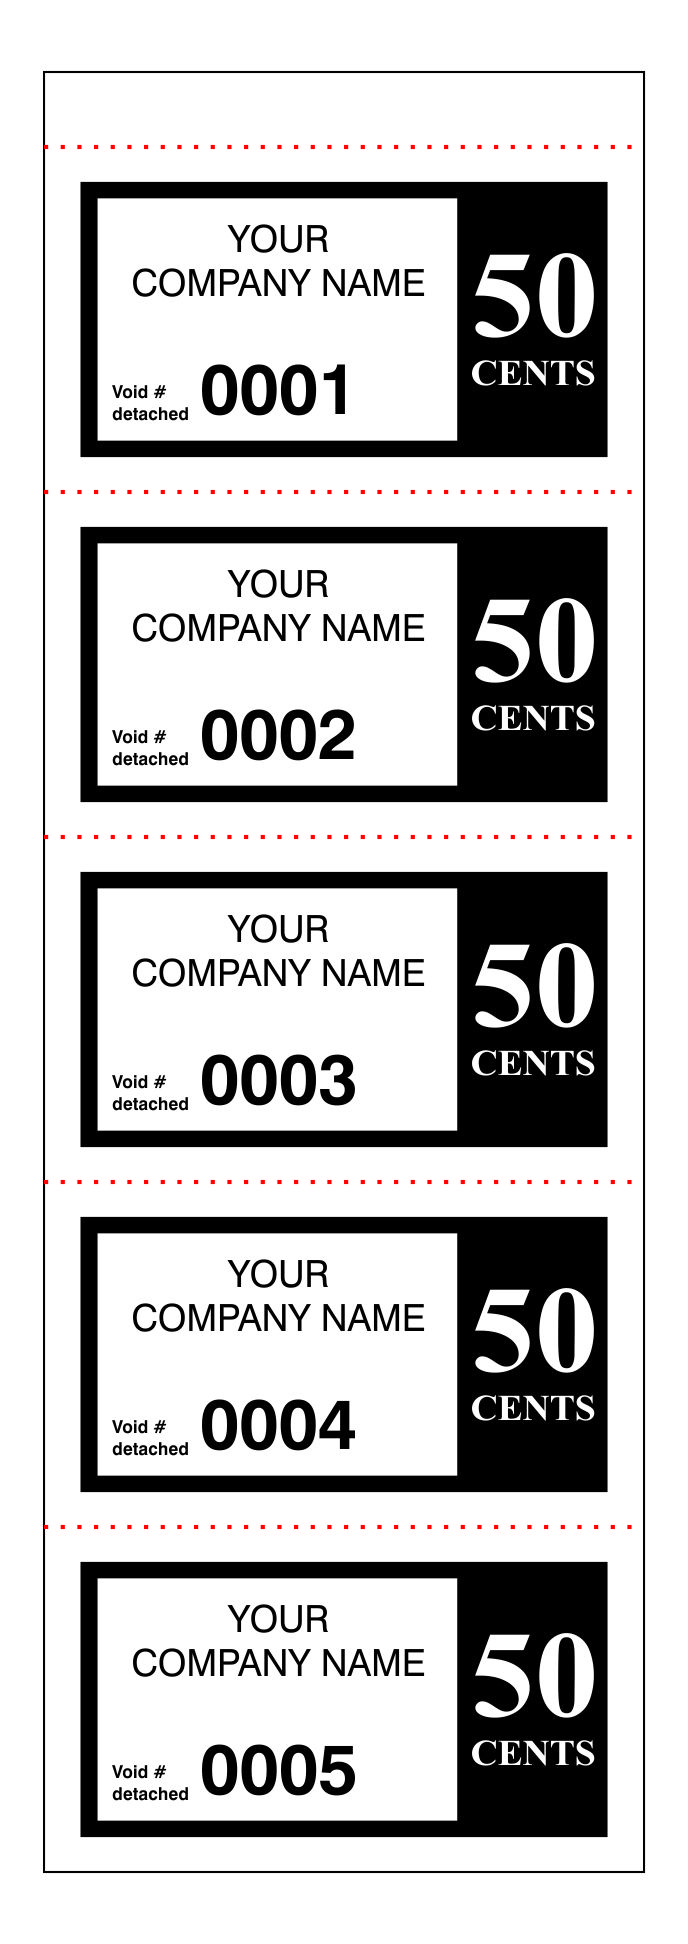 Template Layout of 50 Cents Perforated Ticket Sheets